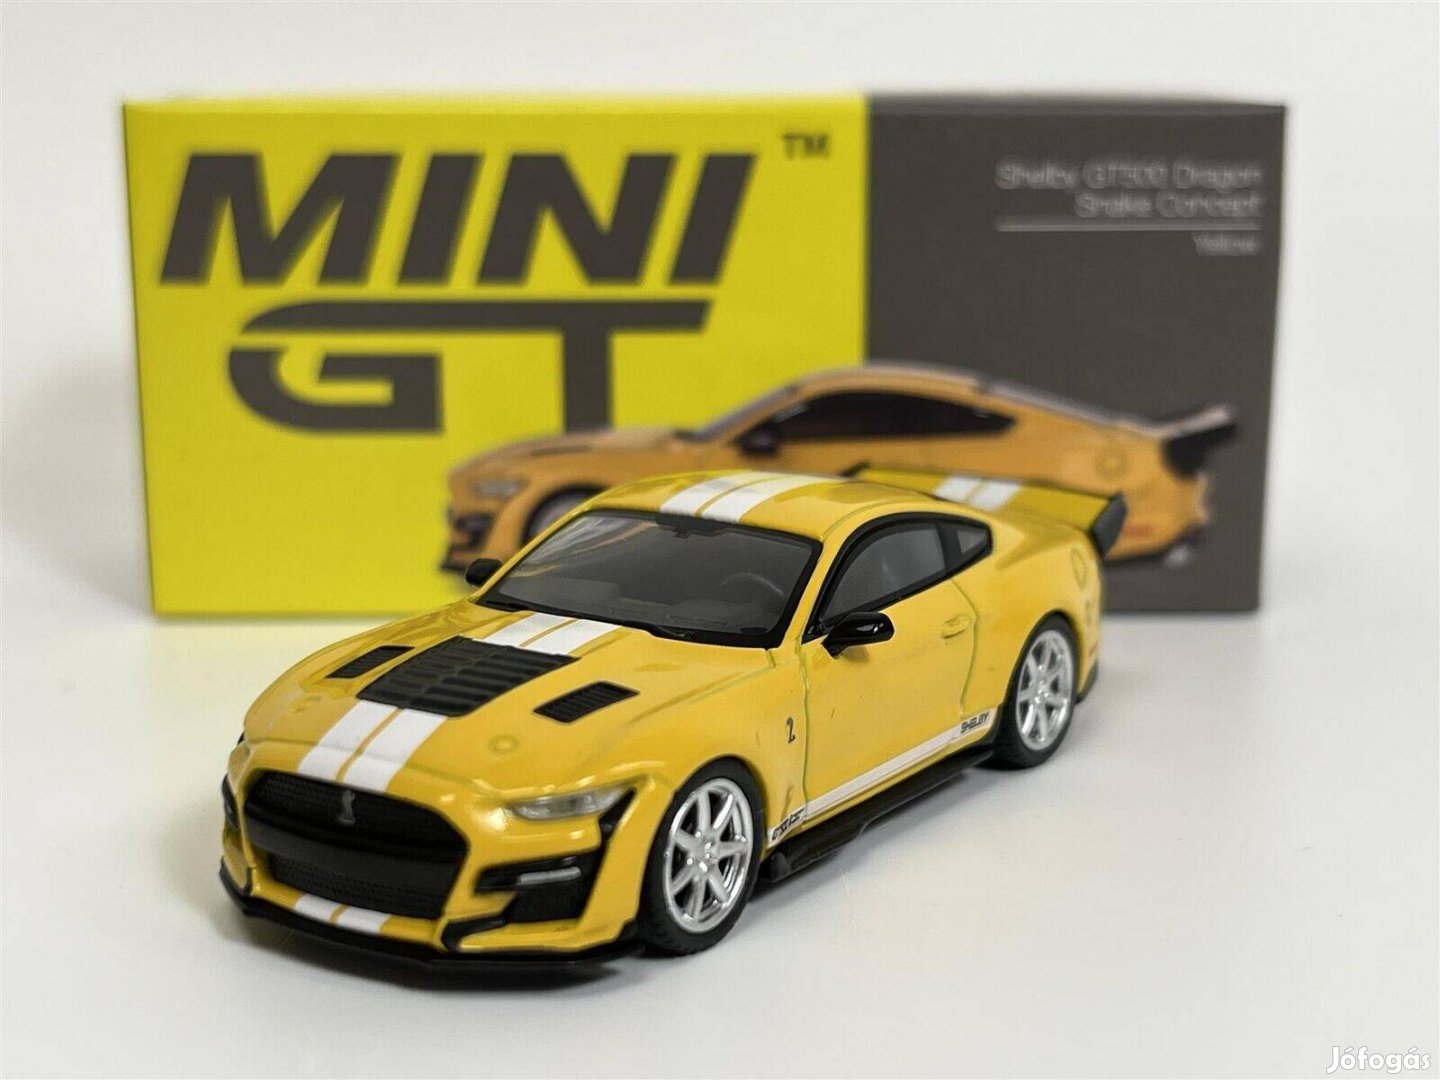 Mini GT MGT00535 Shelby GT500 Dragon Snake Concept Yellow